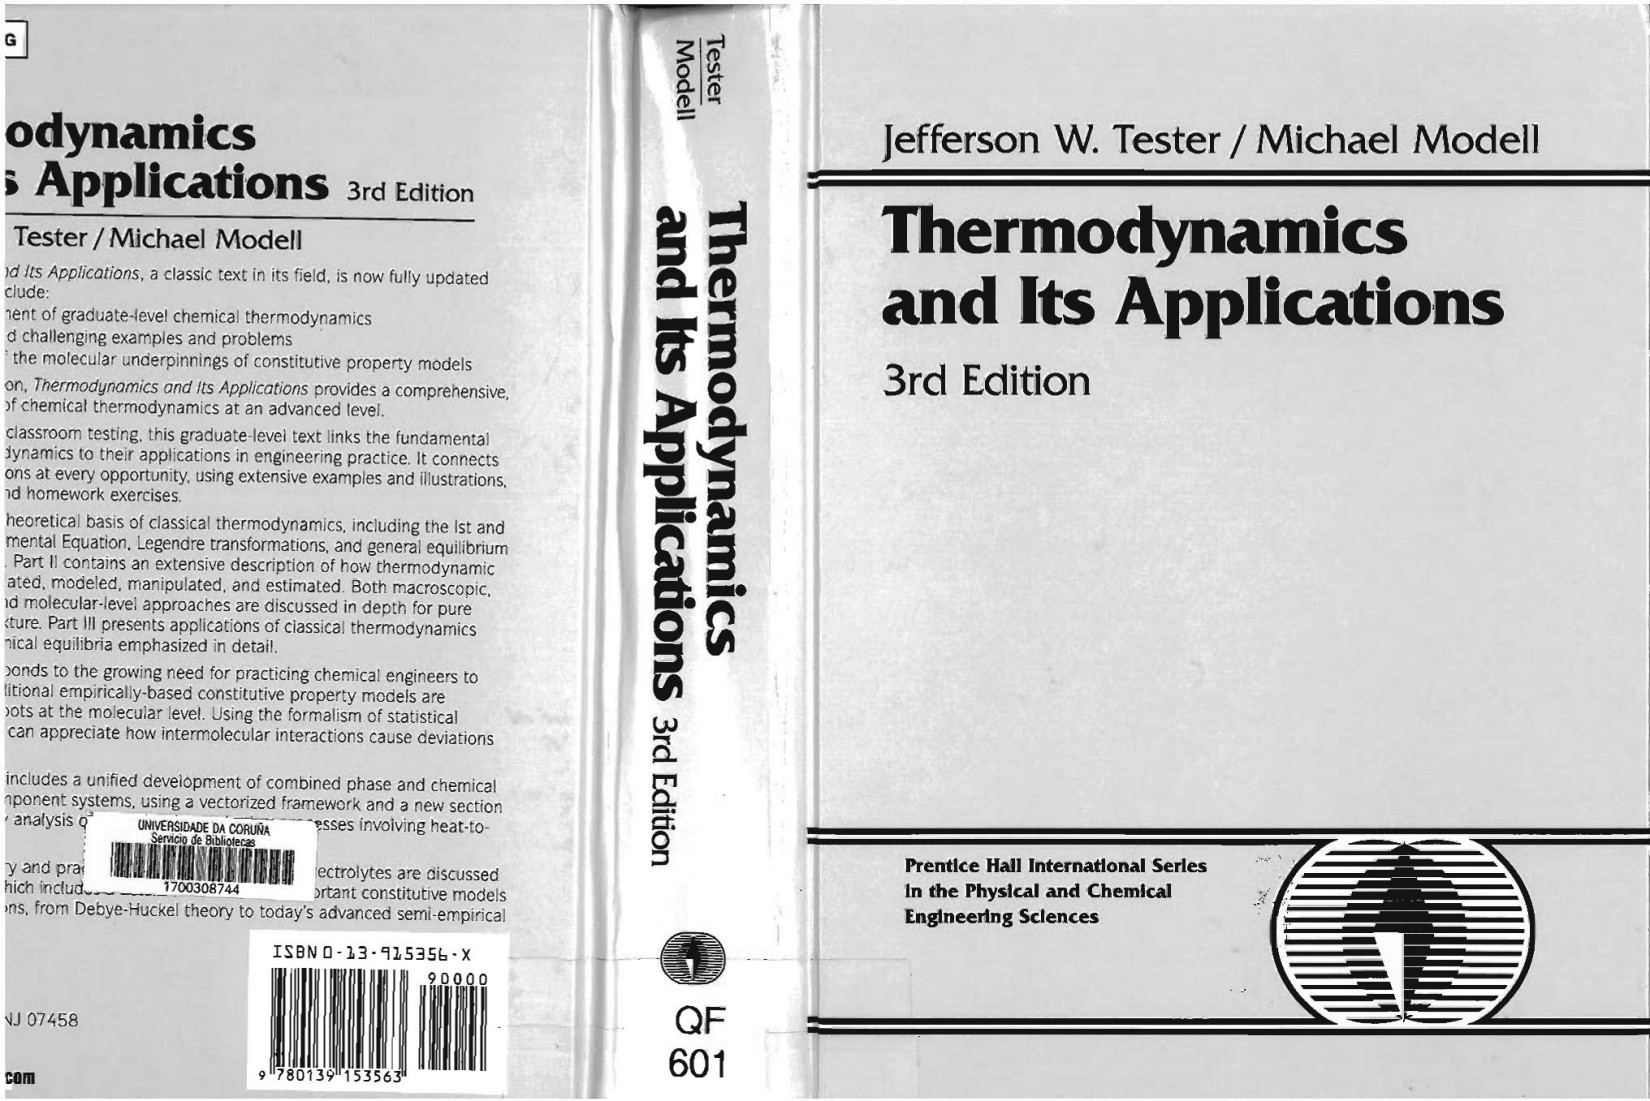 Thermodynamics and Its Applications,3rd ed                                                                                          1996